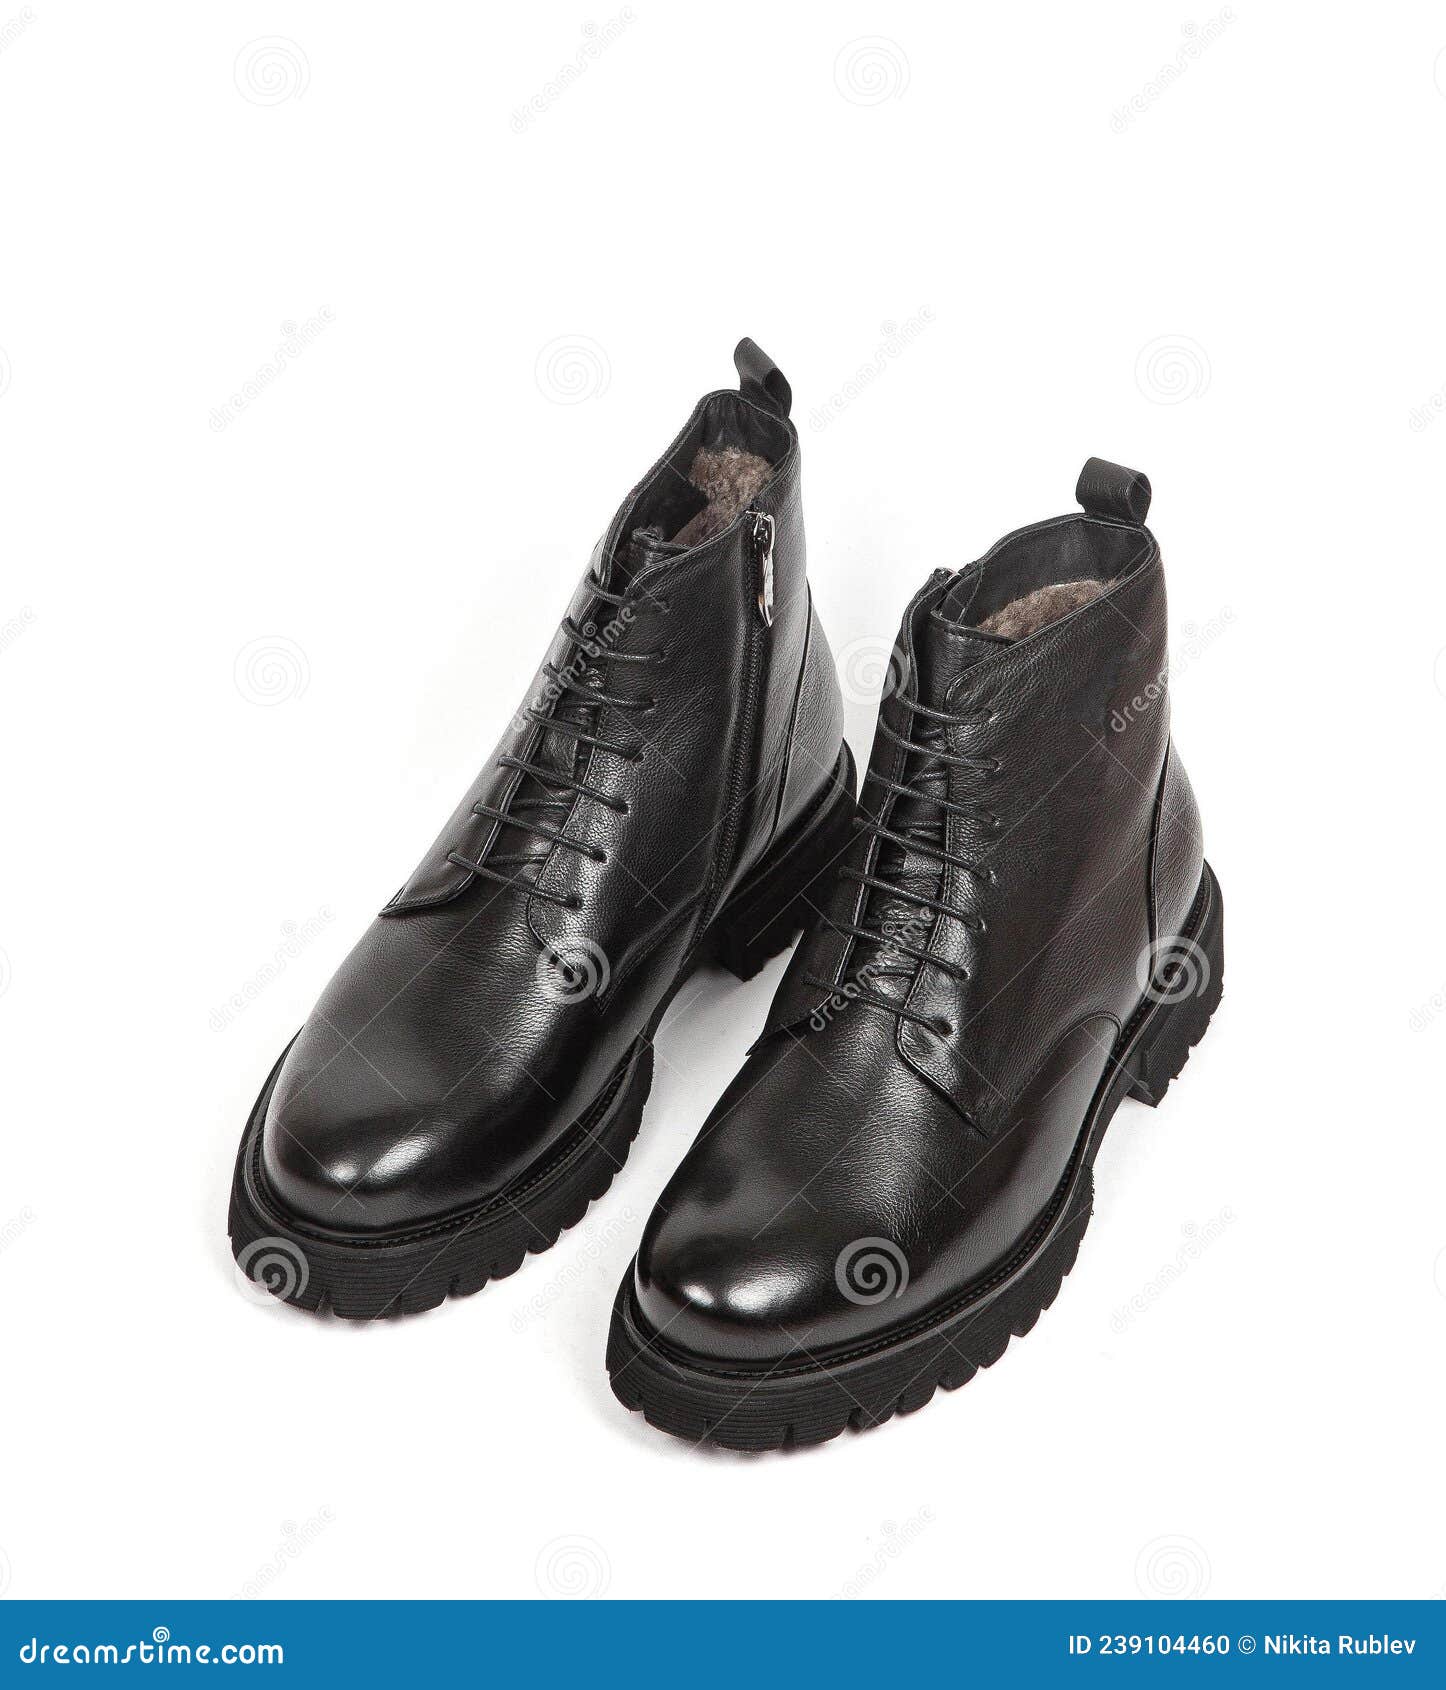 Men Black Winter Leather Boots with Fur Inside Isolated on White ...